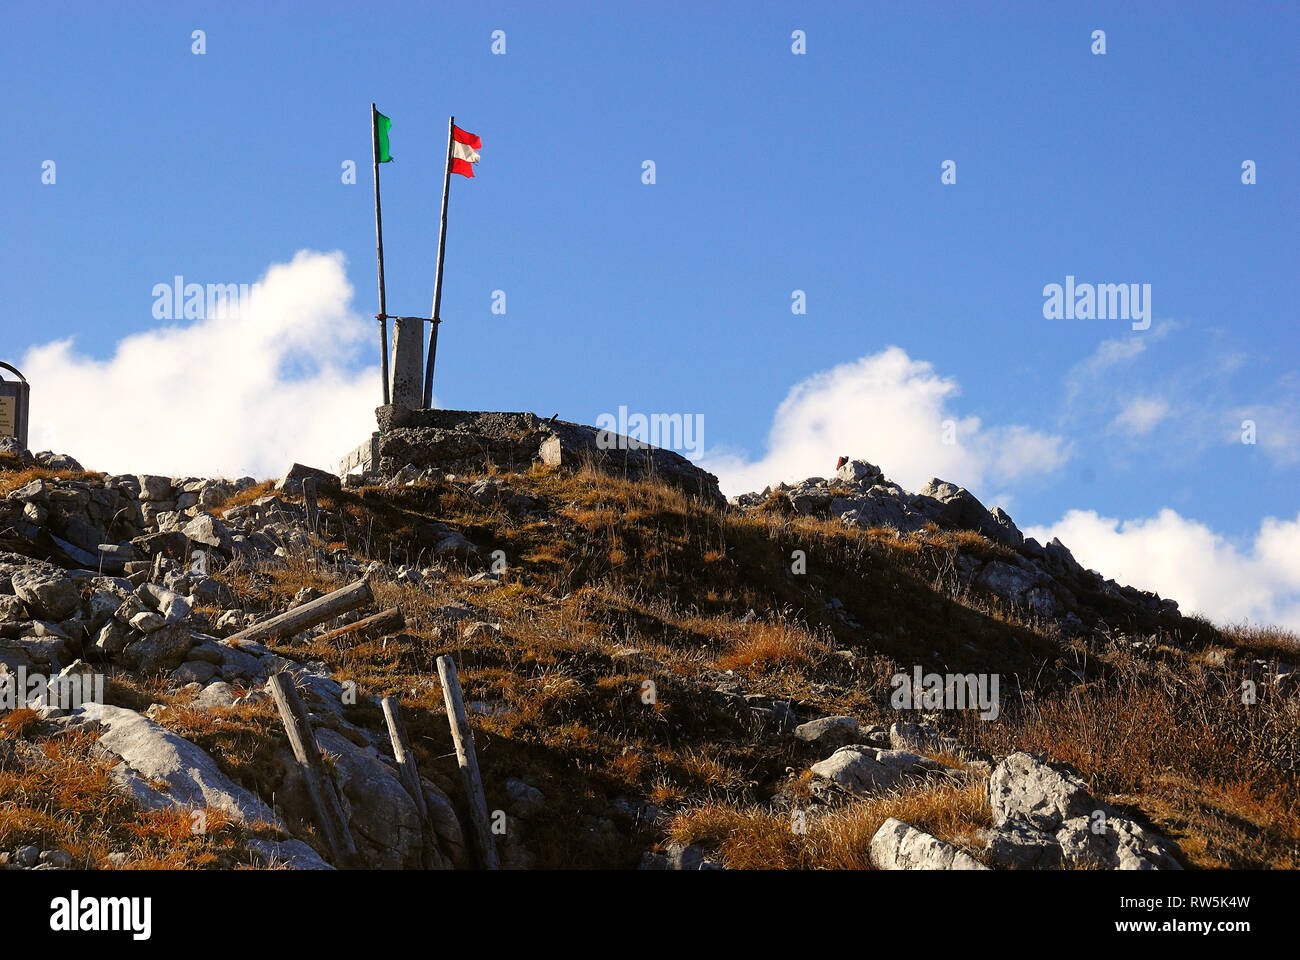 WWI, Carnic Alps, Mount Freikofel. It was the scene of bloody battles between Italian and Austro-Hungarian soldiers during the WWI. The top of the mount with the Italian and the Austrian flags. Stock Photo